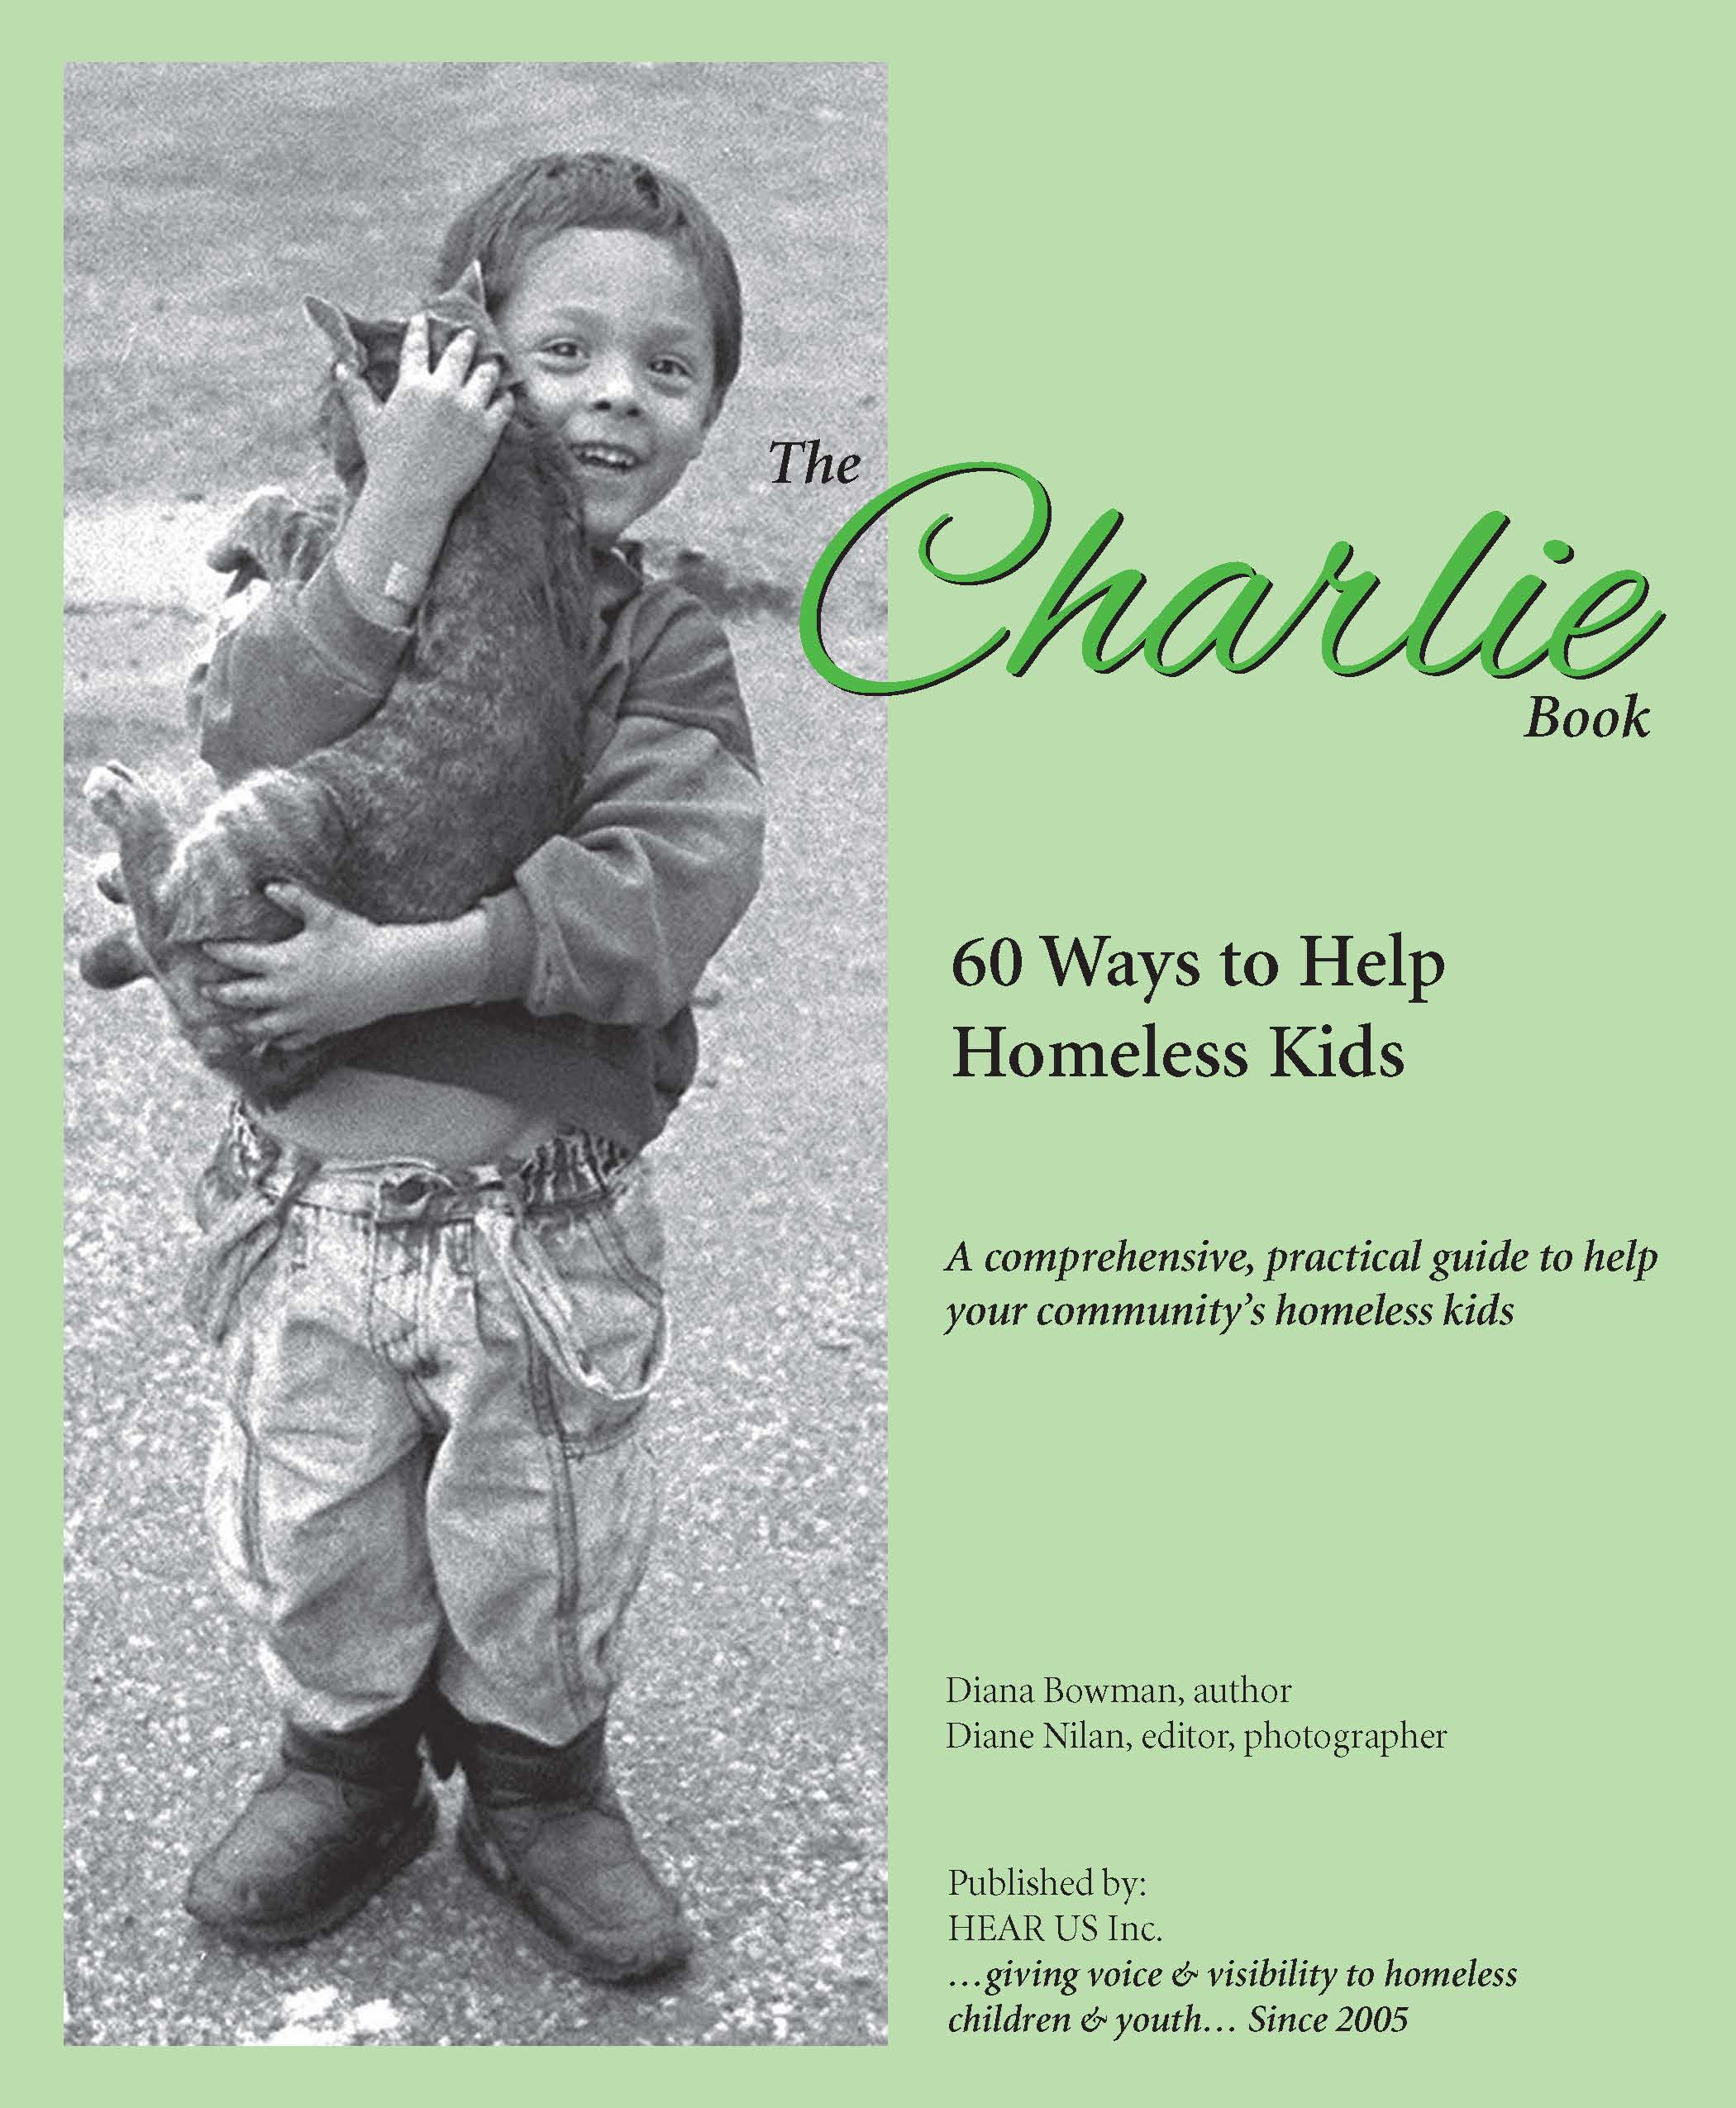 Charlie-book cover